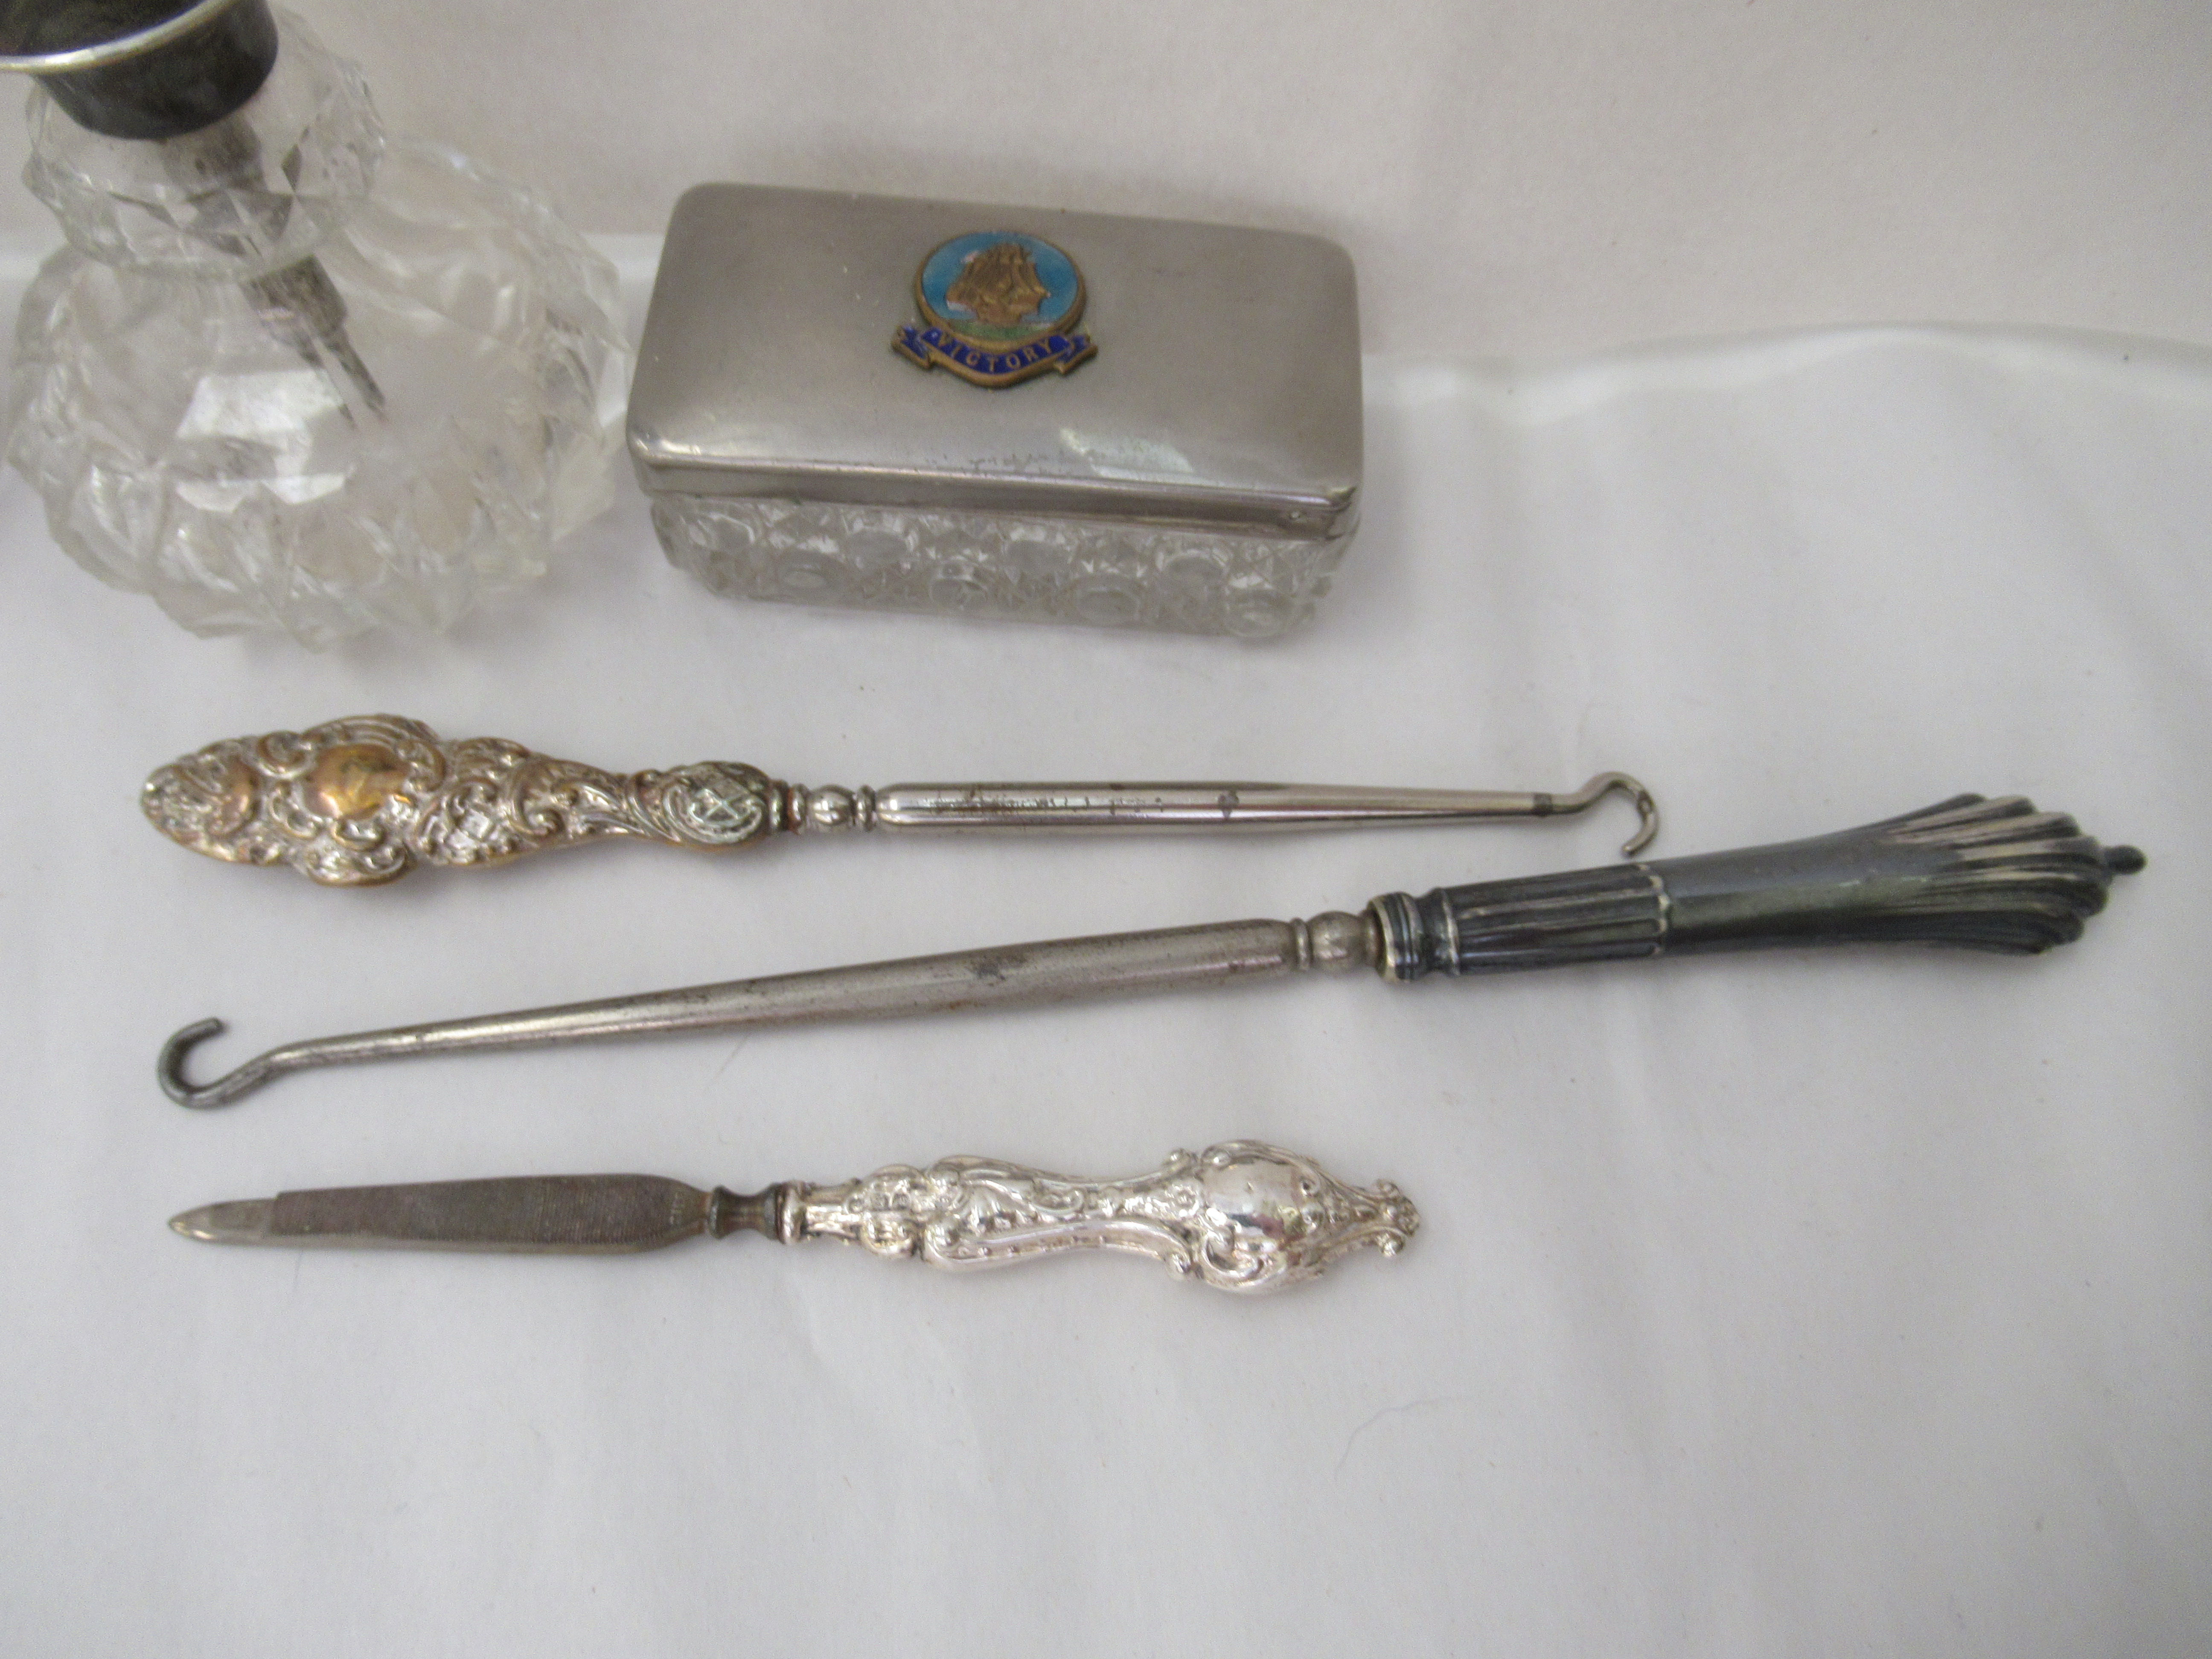 Dressing table accessories: to include filigree items; and tortoiseshell combs/hair grips - Image 3 of 3